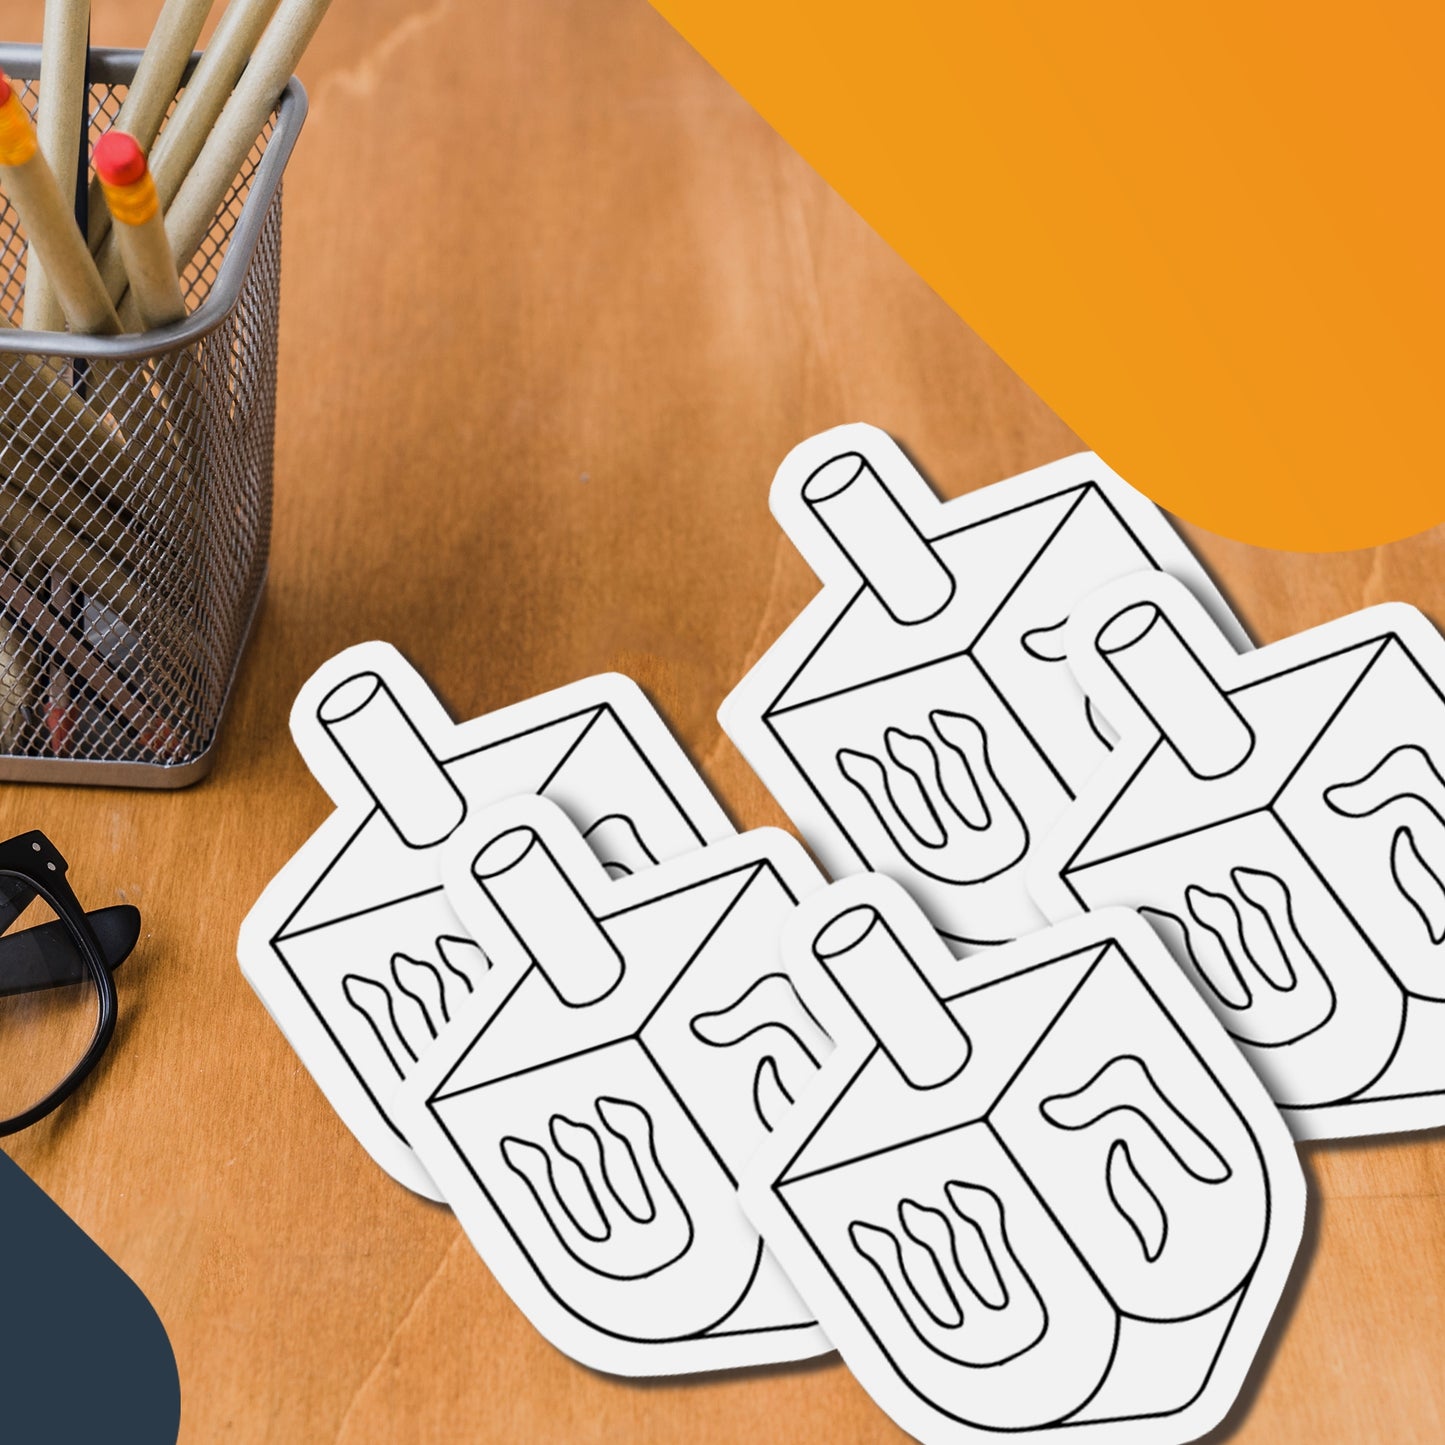 Color Your Own Hanukkah Dreidle Magnets, a Great DIY for You or to Share with Friends, Decorate 5 Magnetic Dreidle Holiday Refrigerator Magnets